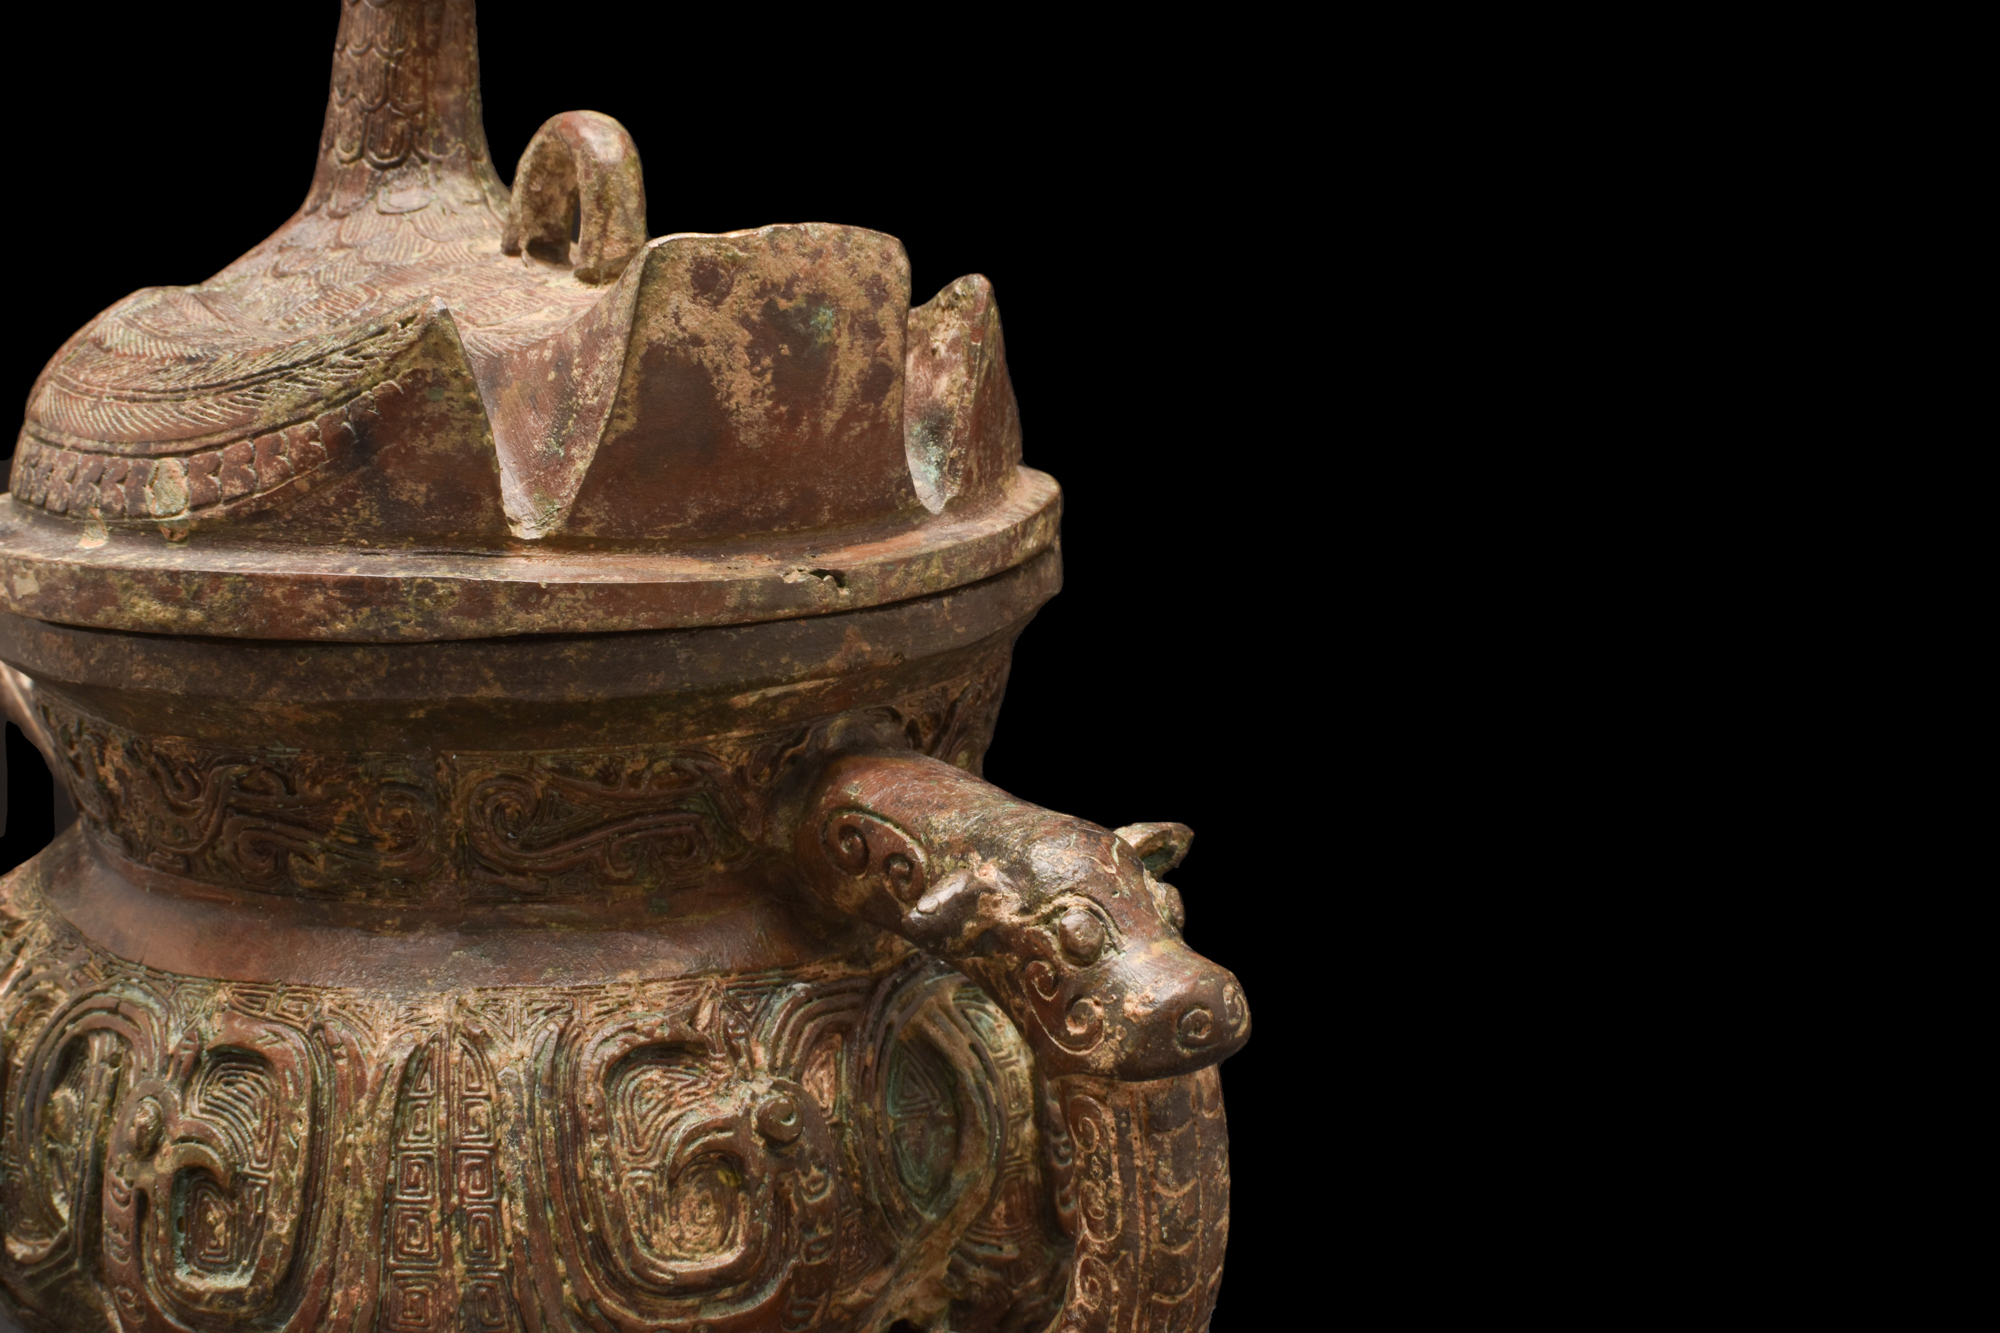 CHINESE ARCHAIC BRONZE POURING VESSEL WITH A BIRD-SHAPED LID - Image 9 of 9